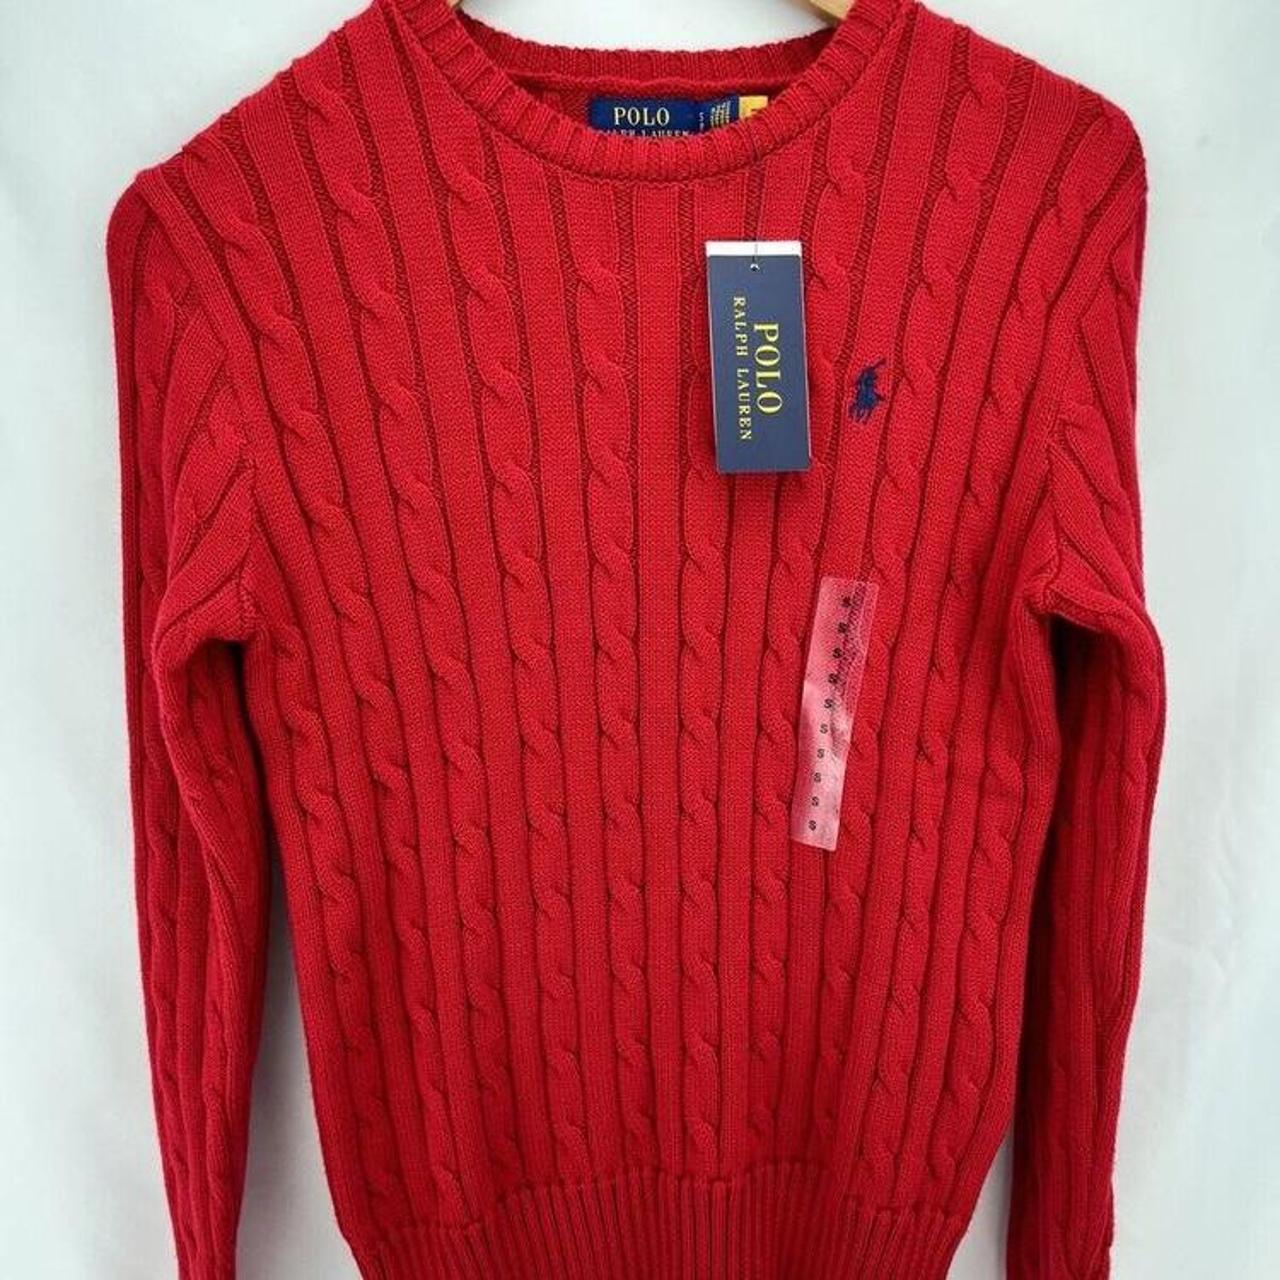 Polo Ralph Lauren red sweater Worn once Size S but... - Depop